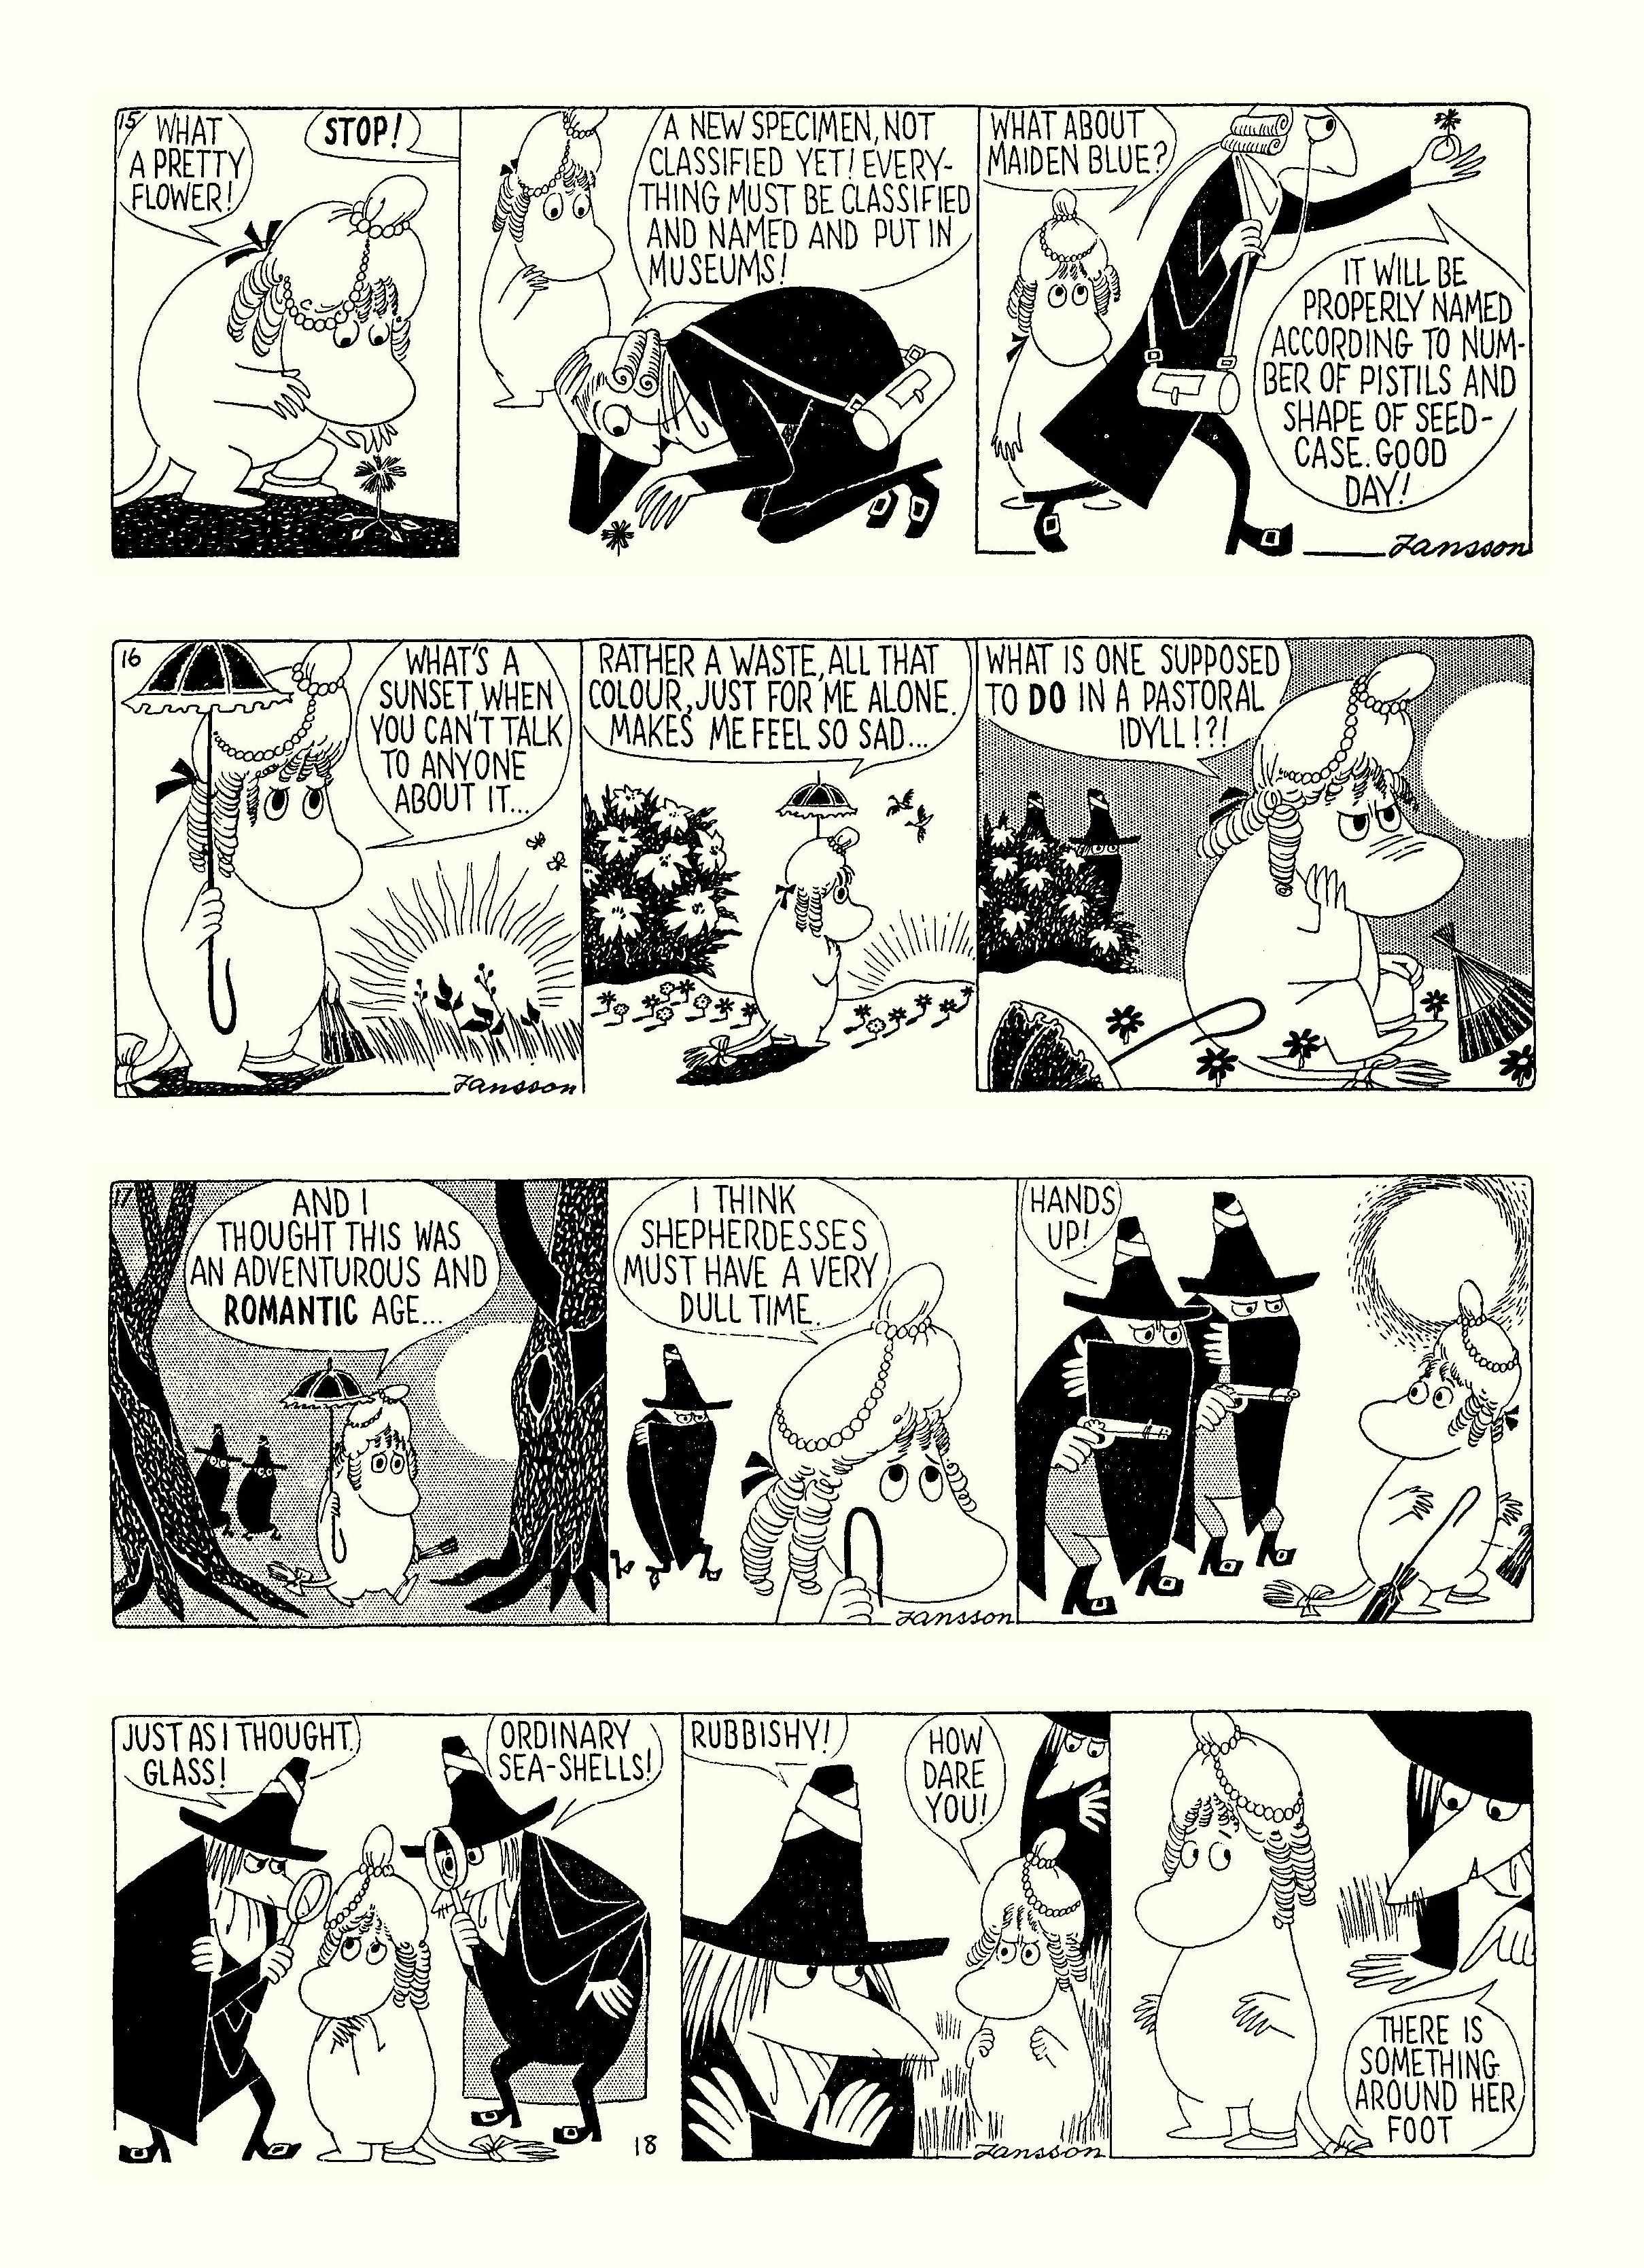 Read online Moomin: The Complete Tove Jansson Comic Strip comic -  Issue # TPB 4 - 27